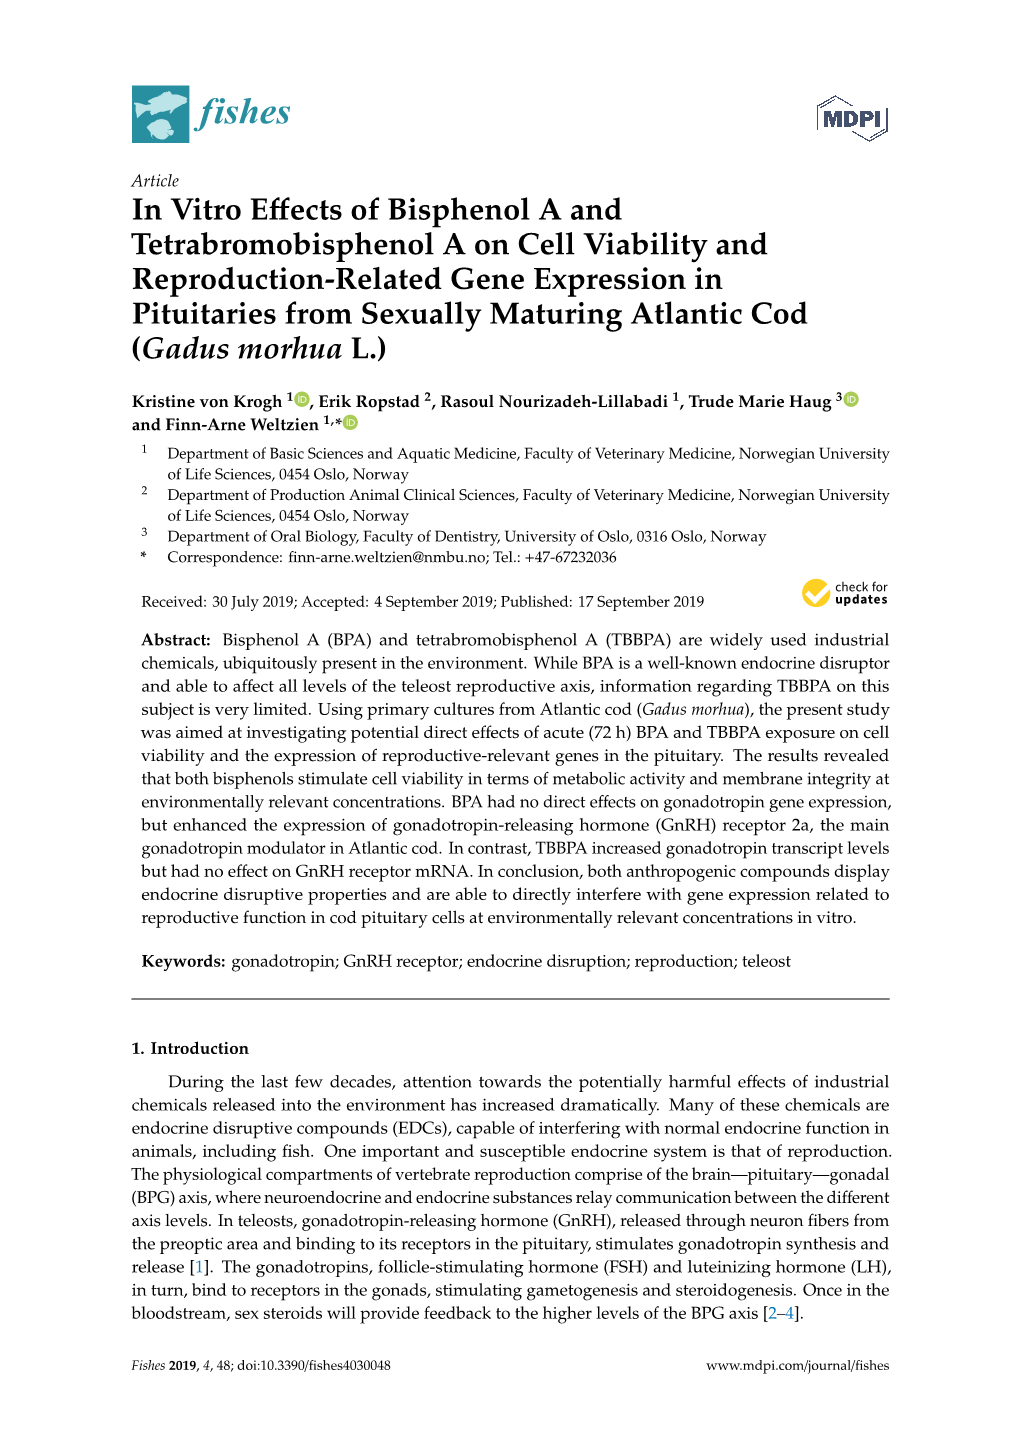 In Vitro Effects of Bisphenol a and Tetrabromobisphenol a on Cell